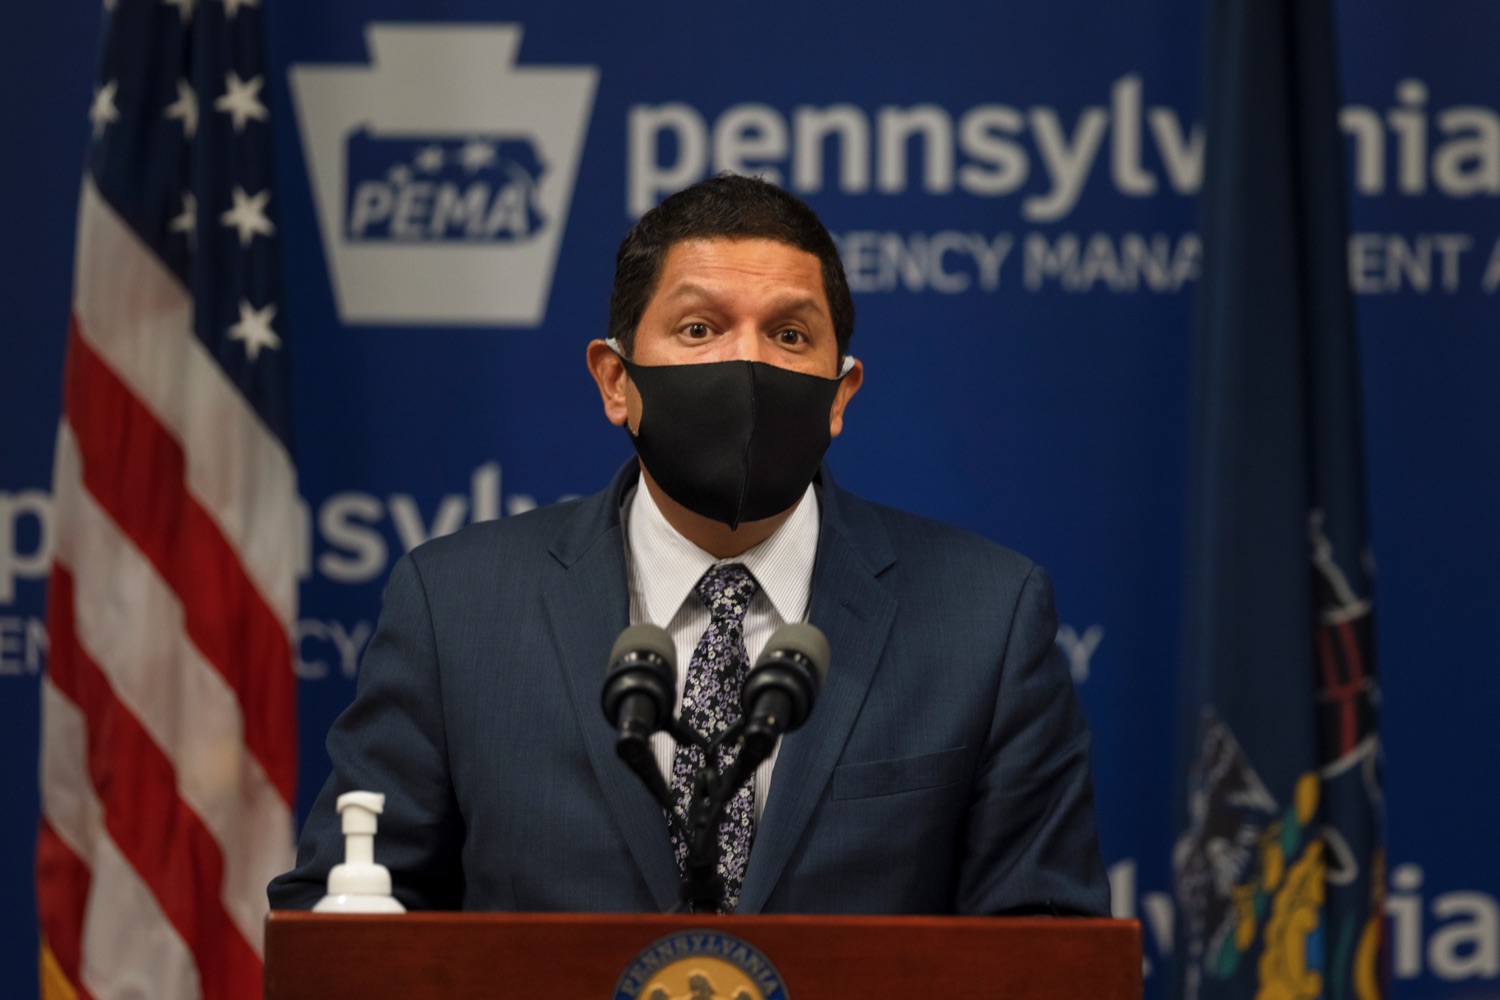 Education Secretary Noe Ortega speaks during a press conference, which discussed the current state of COVID-19 and a new Secretary of Health order requiring masks to be worn inside K-12 school buildings, early learning programs and child care providers, inside Pennsylvania Emergency Management Agency in Harrisburg on Tuesday, August 31, 2021.<br><a href="https://filesource.amperwave.net/commonwealthofpa/photo/19089_GOV_School_Masking_NK_005.jpg" target="_blank">⇣ Download Photo</a>